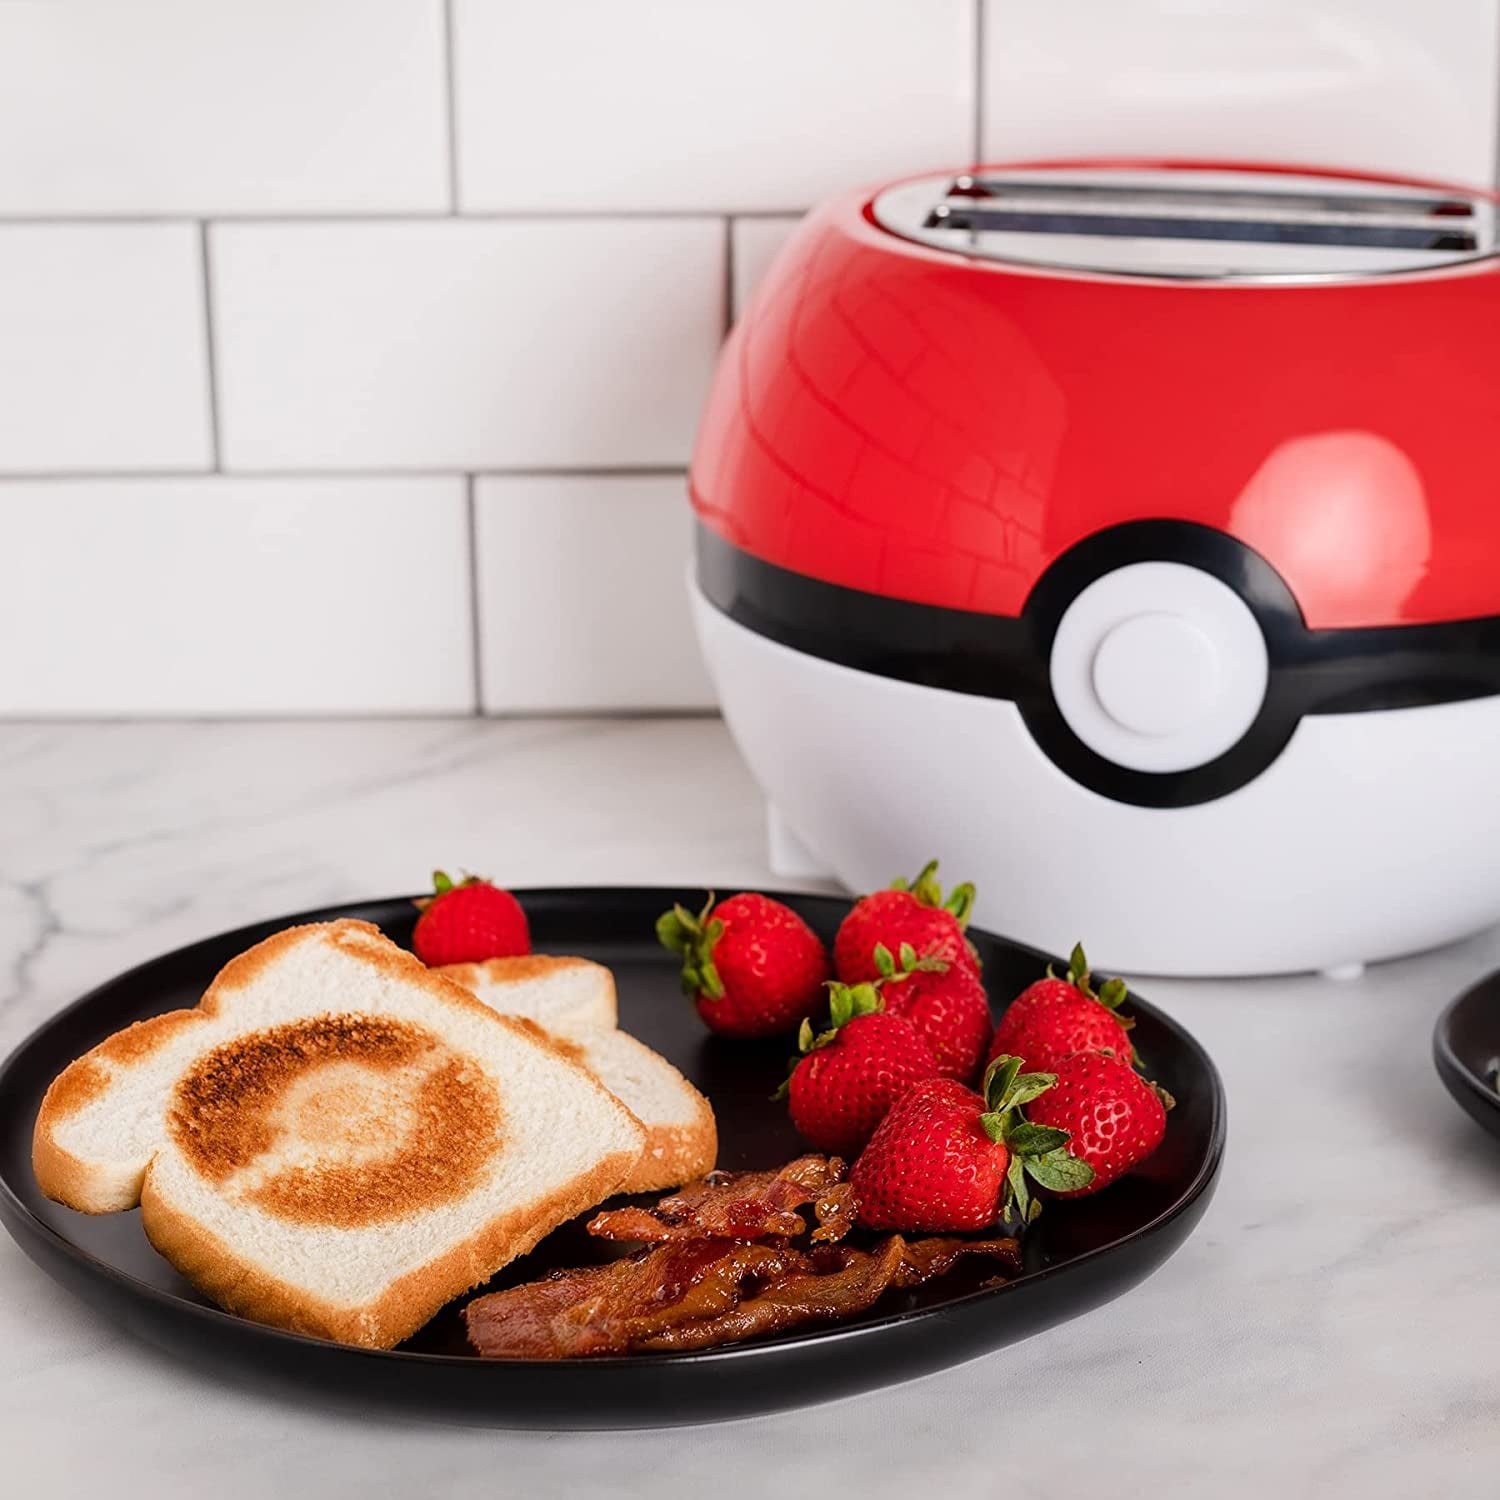 https://ak1.ostkcdn.com/images/products/is/images/direct/bcef204fb4c654124ba6a51f90ec6854d5f4b92a/Pokemon-Pokeball-Halo-Toaster-%5Cu2013-Toasts-a-Pokeball-On-Your-Bread.jpg